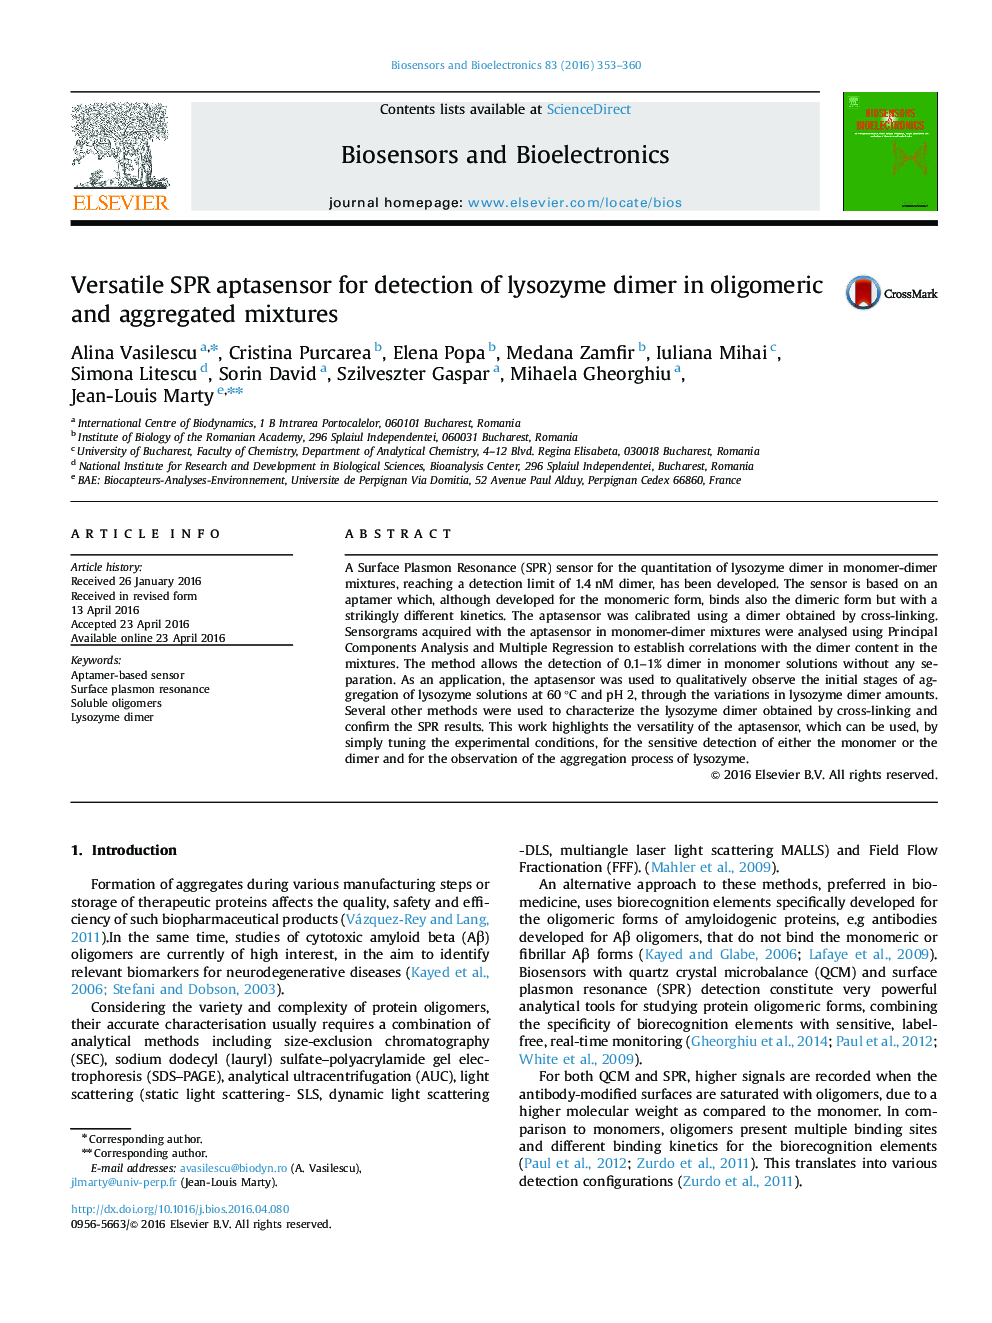 Versatile SPR aptasensor for detection of lysozyme dimer in oligomeric and aggregated mixtures